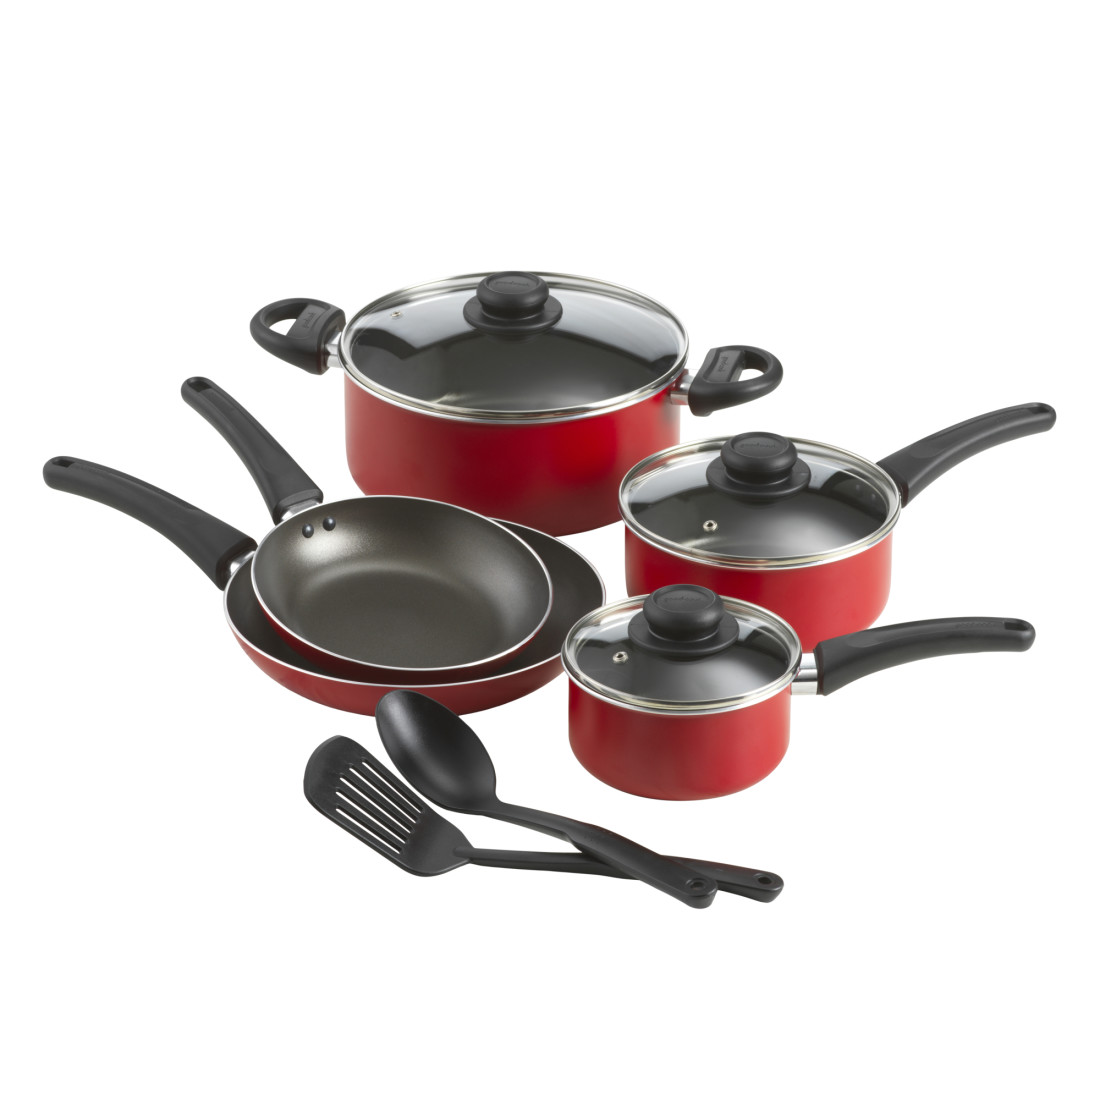 How to Choose, Use, and Care for Your Nonstick Cookware